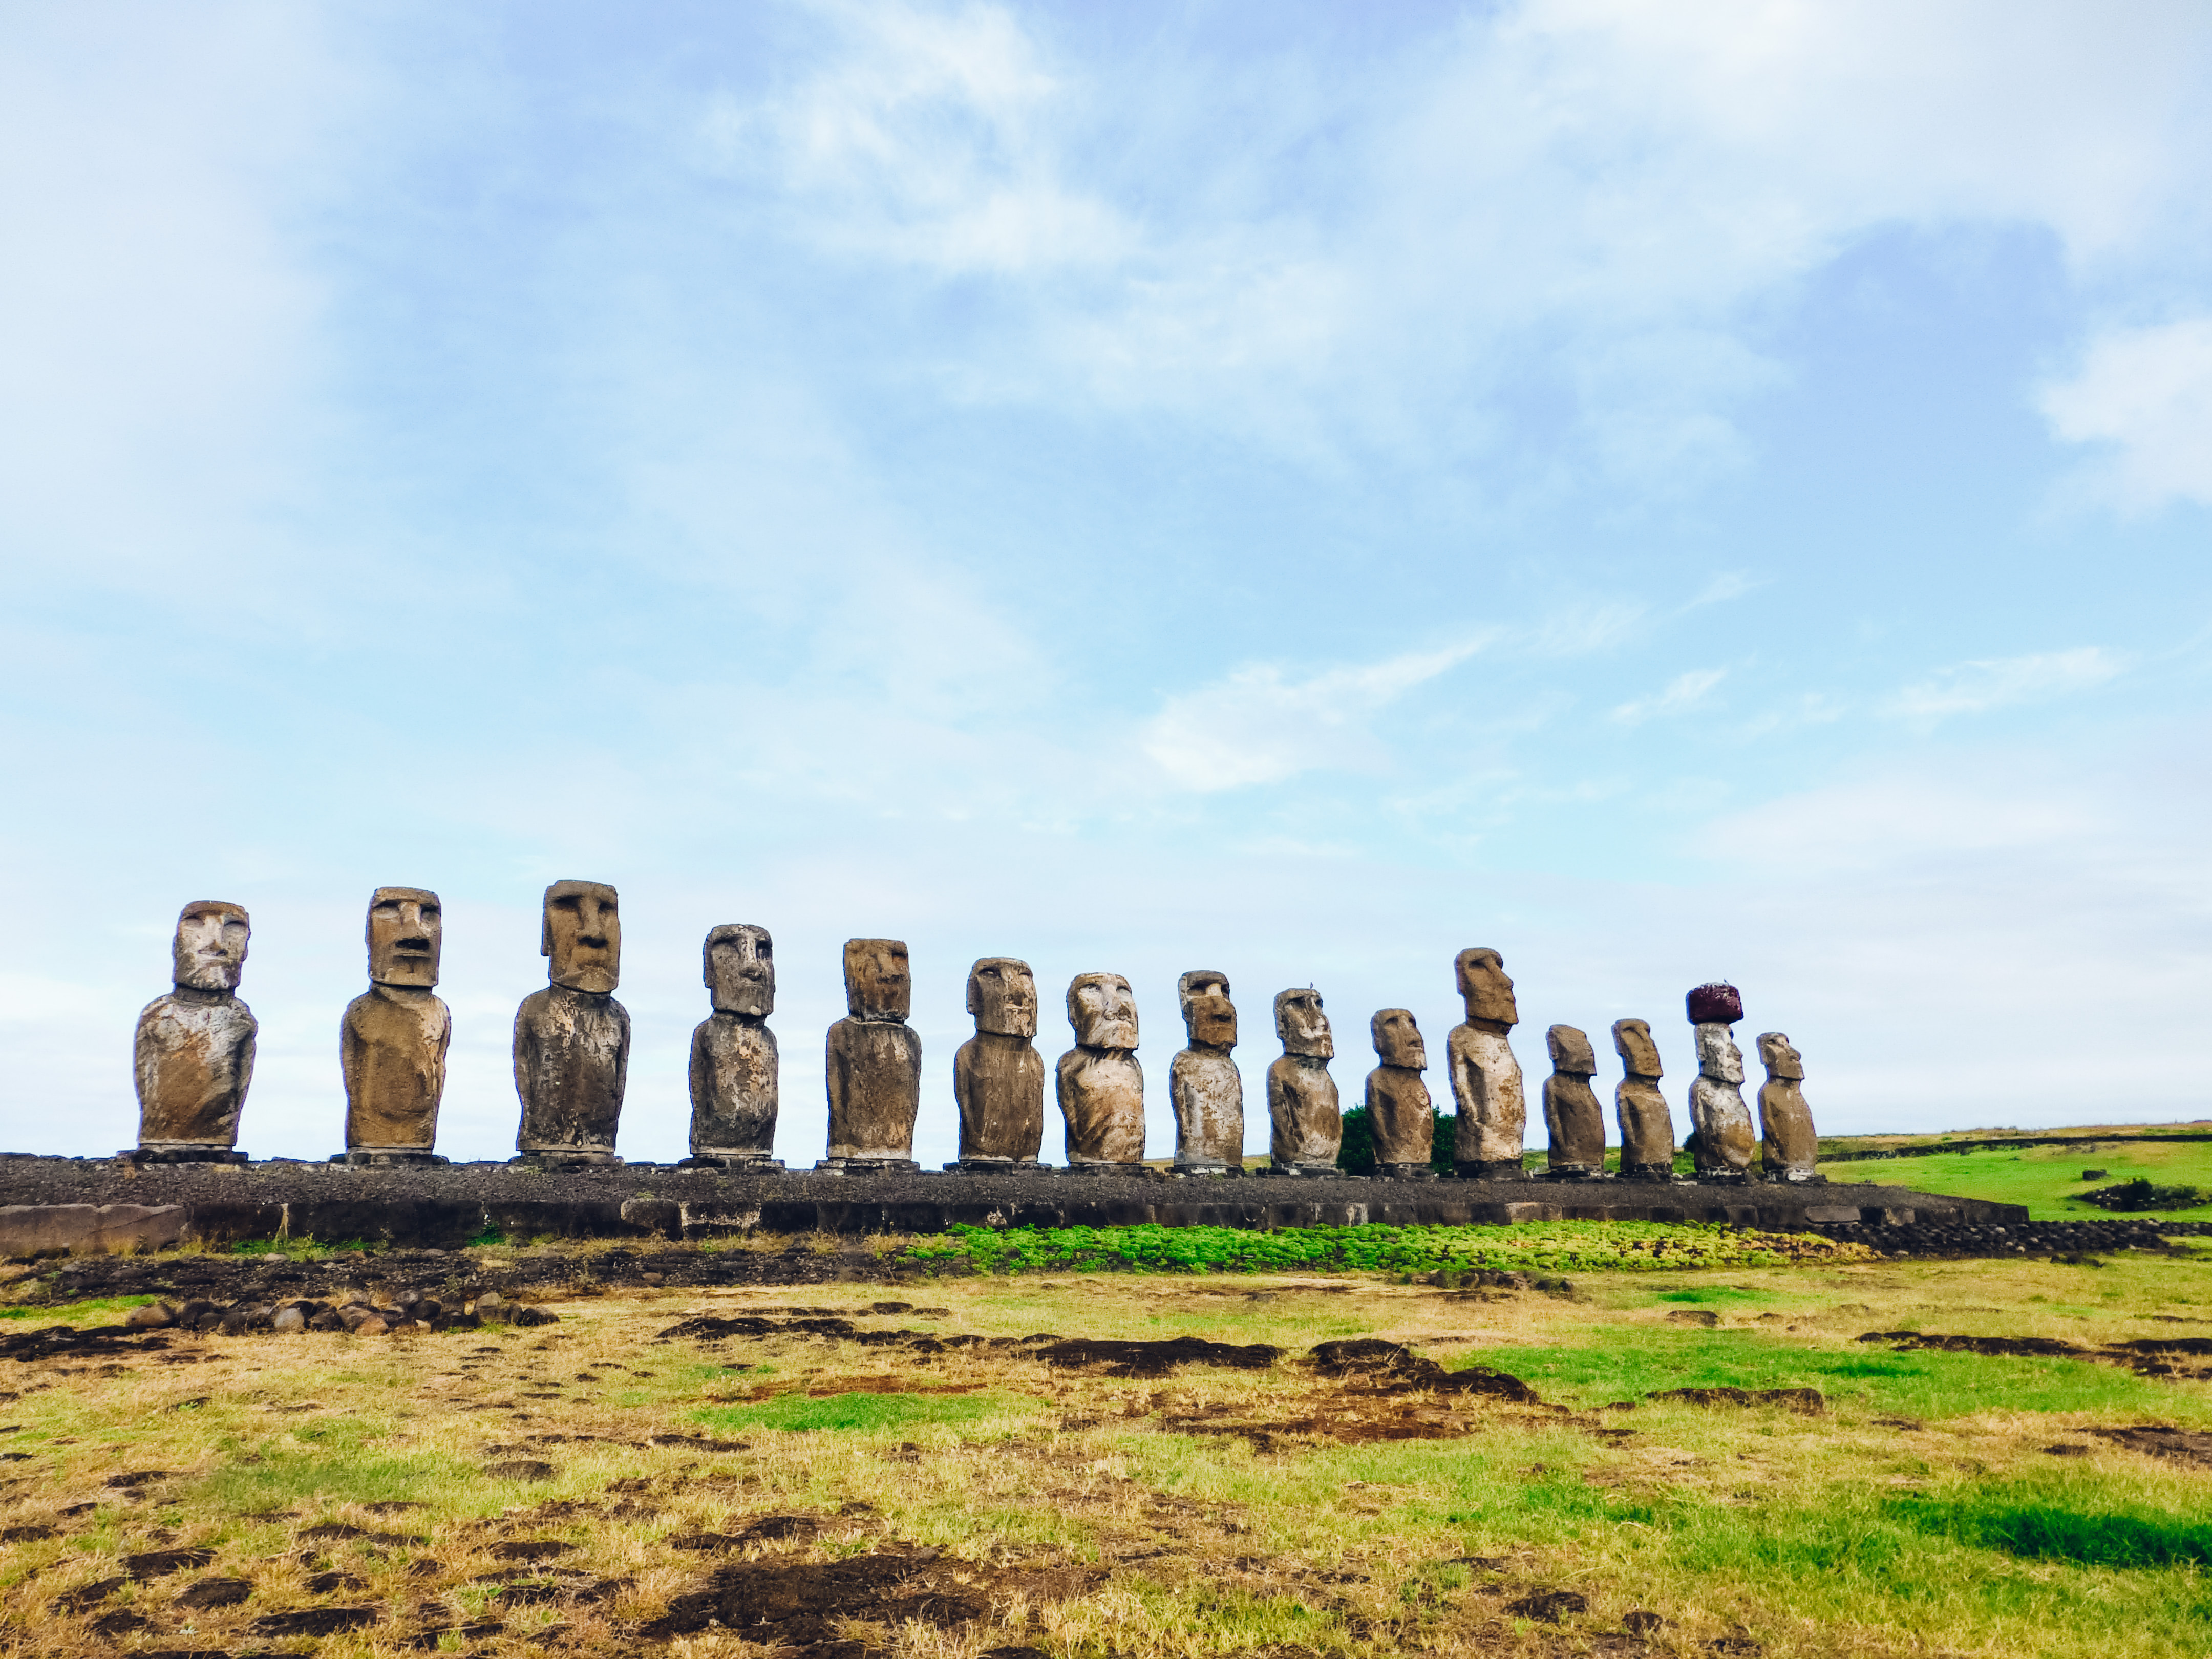 Easter Island's largest ahu - 15 stone moai in a row looking out over a field